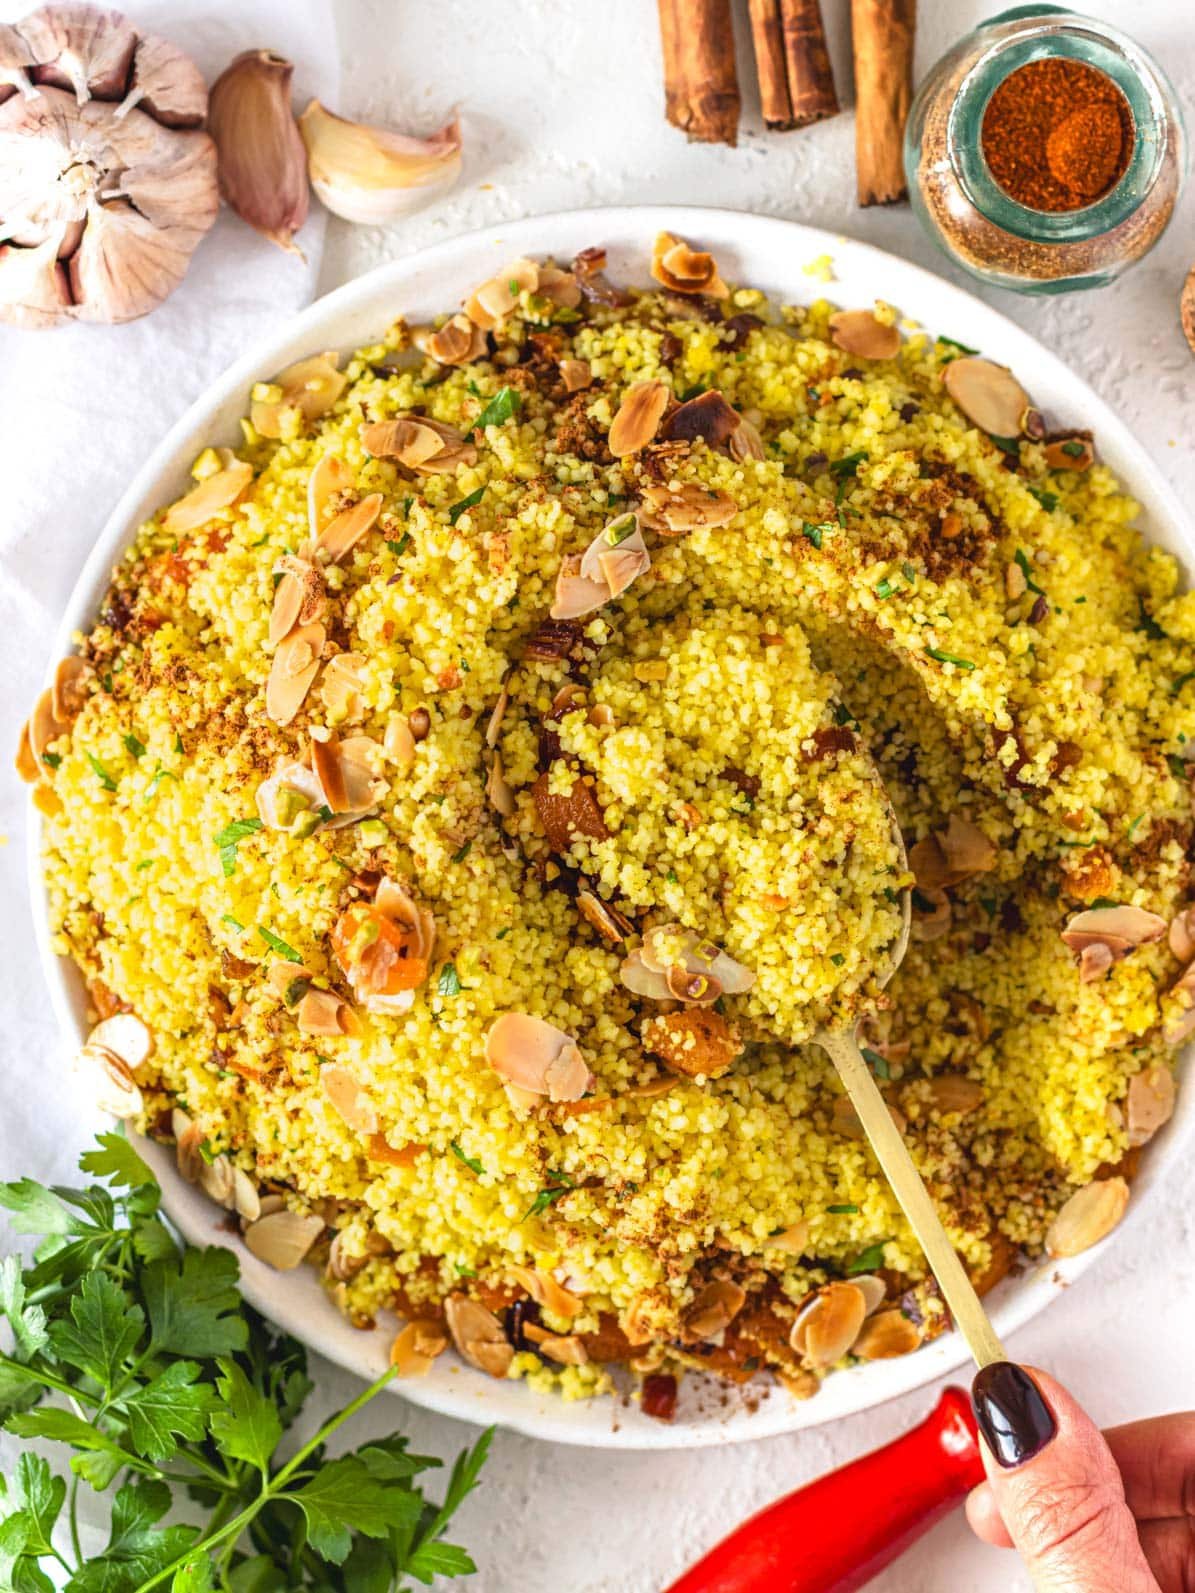 Moroccan couscous with hand and a golden spoon